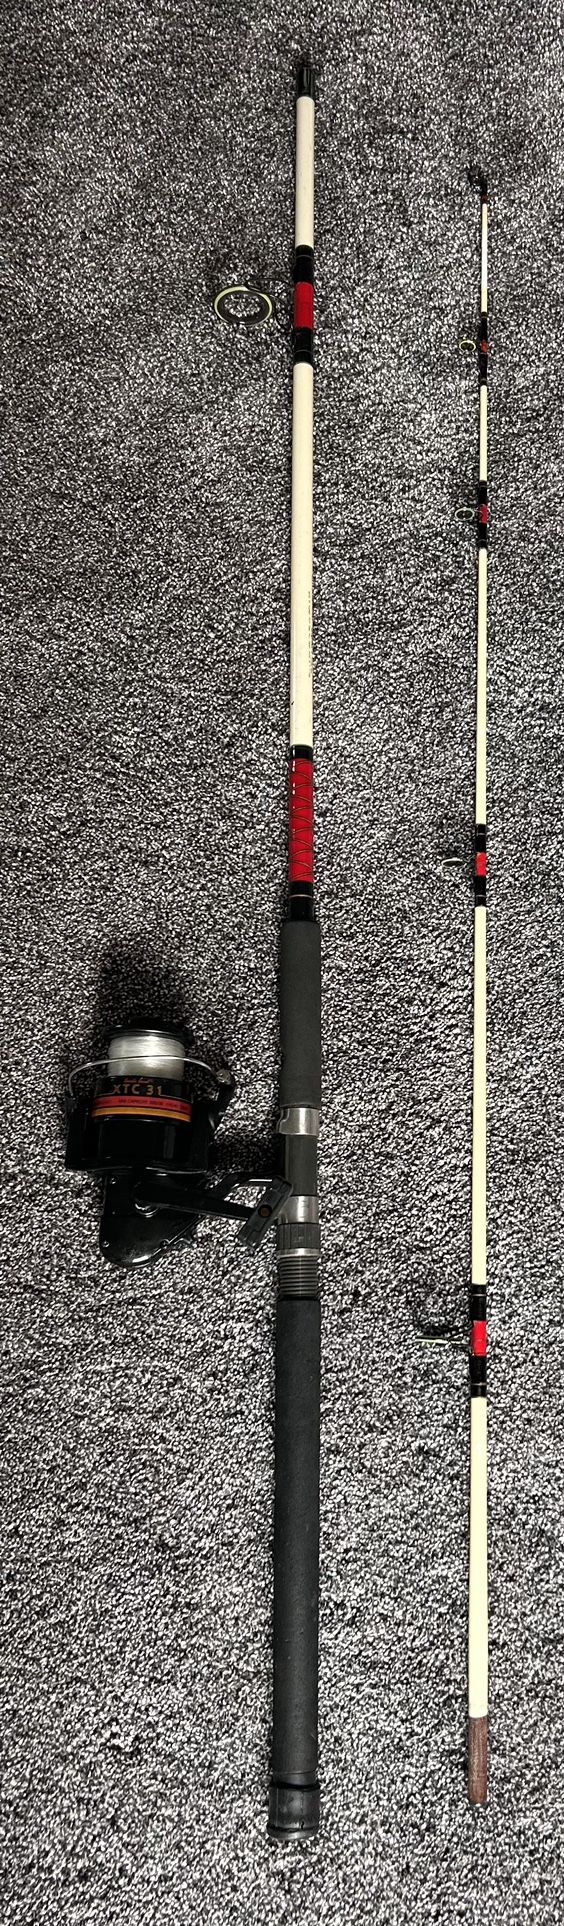 Surf Caster Fishing Rod and Reel